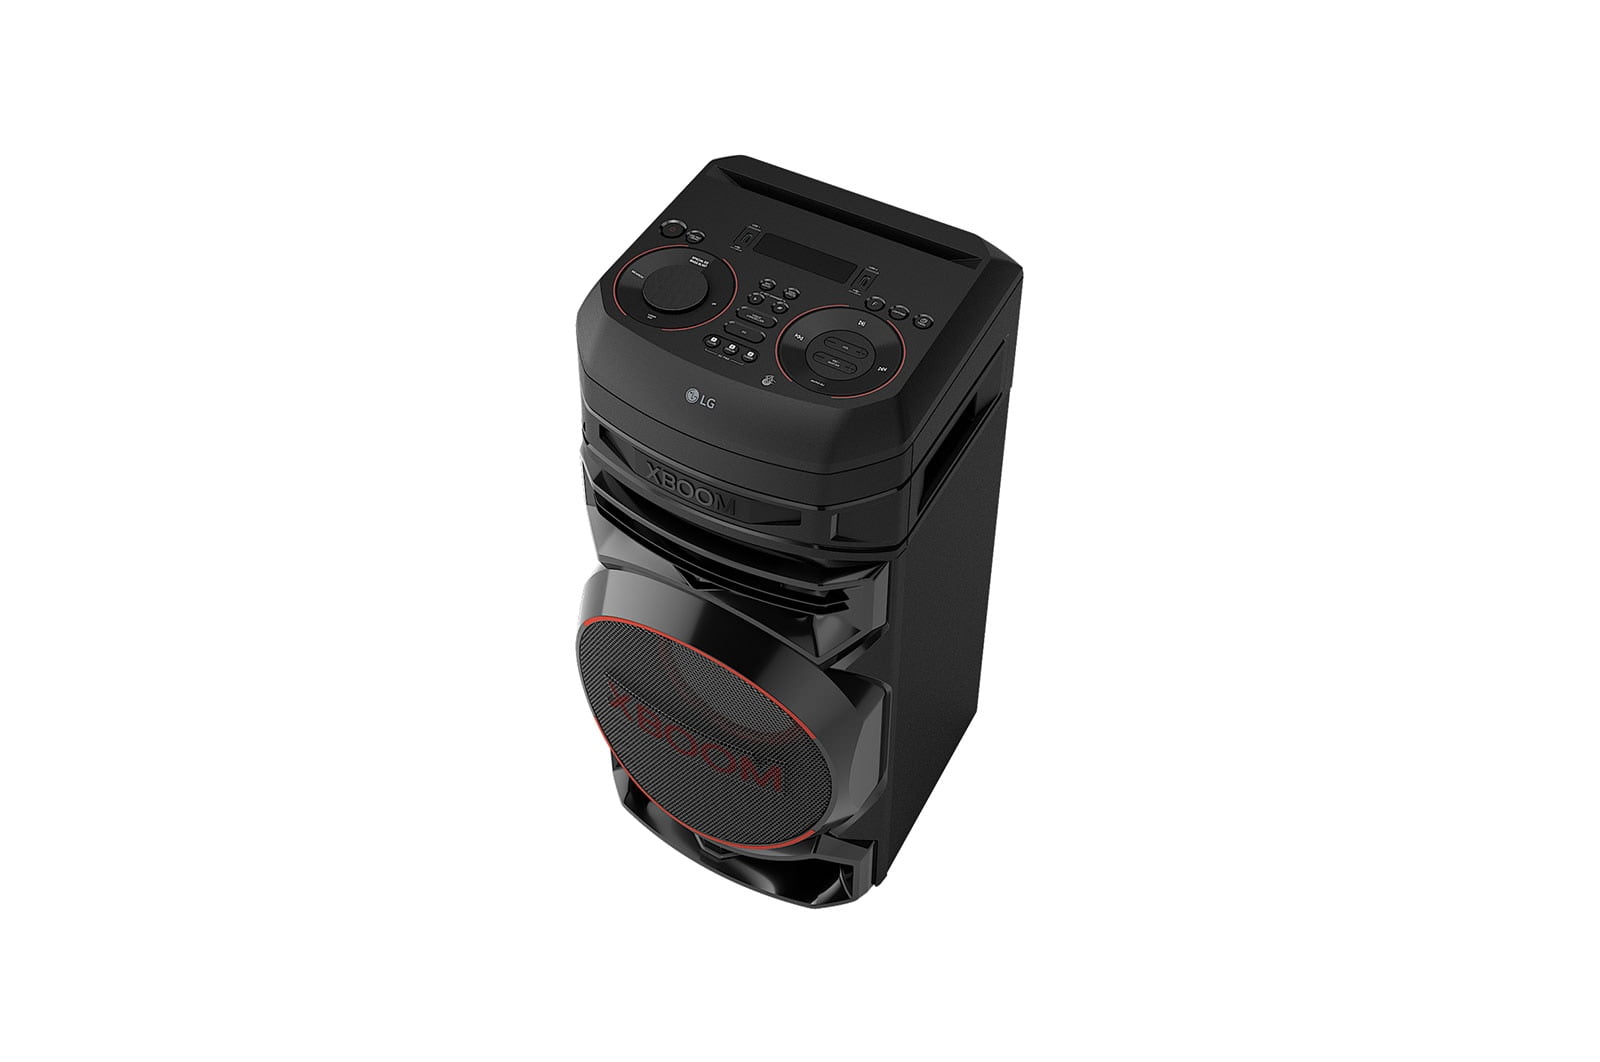 LG RNC5 XBOOM Audio System with Bluetooth® and Bass Blast - Black